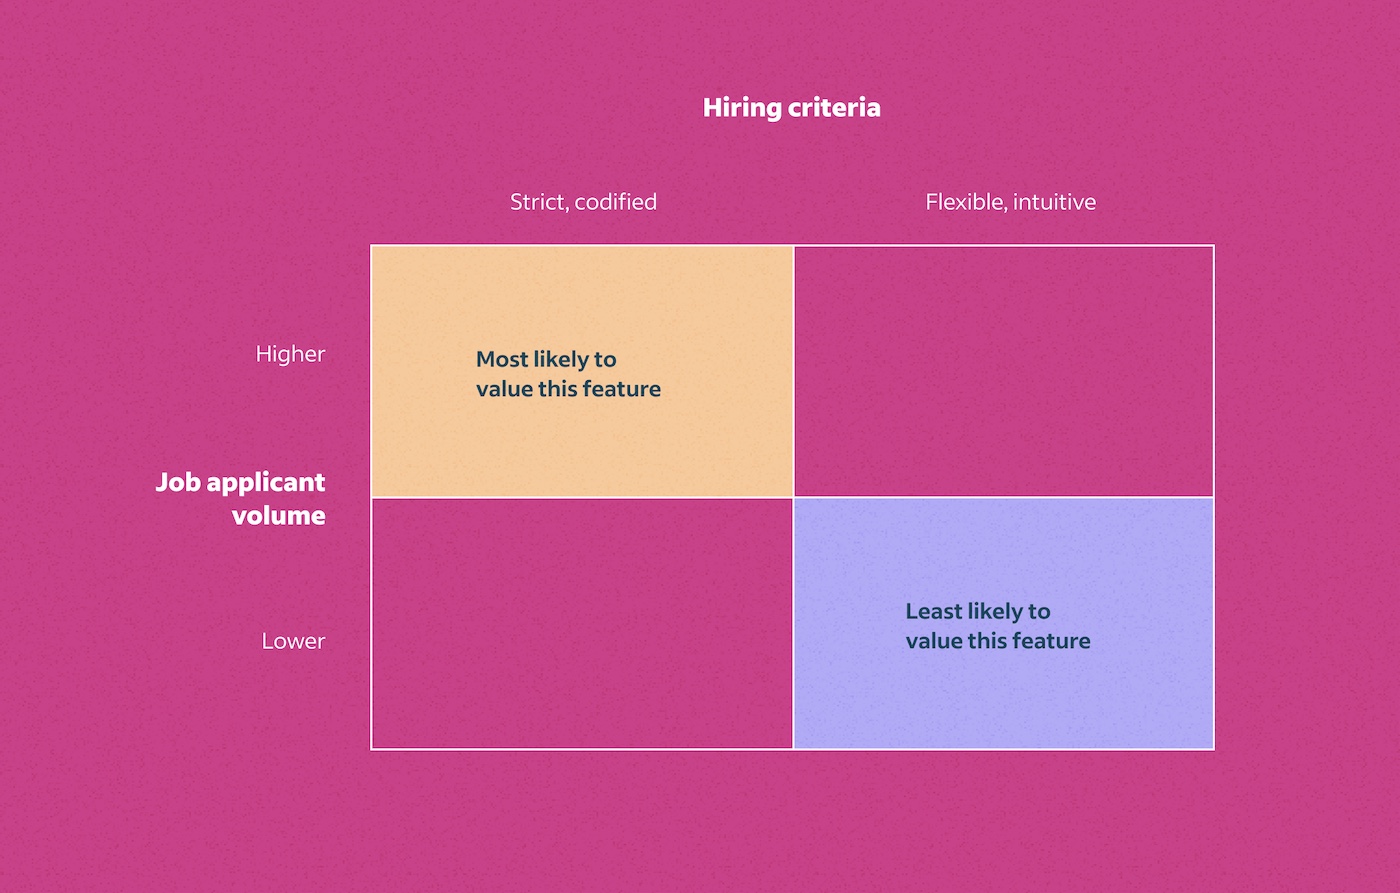 Rectangle split into 4 sections that divides users by strict or flexible hiring criteria on top and high or low hiring volume on the side. Depending on where they fall in the chart, user groups responded differently to a product feature.